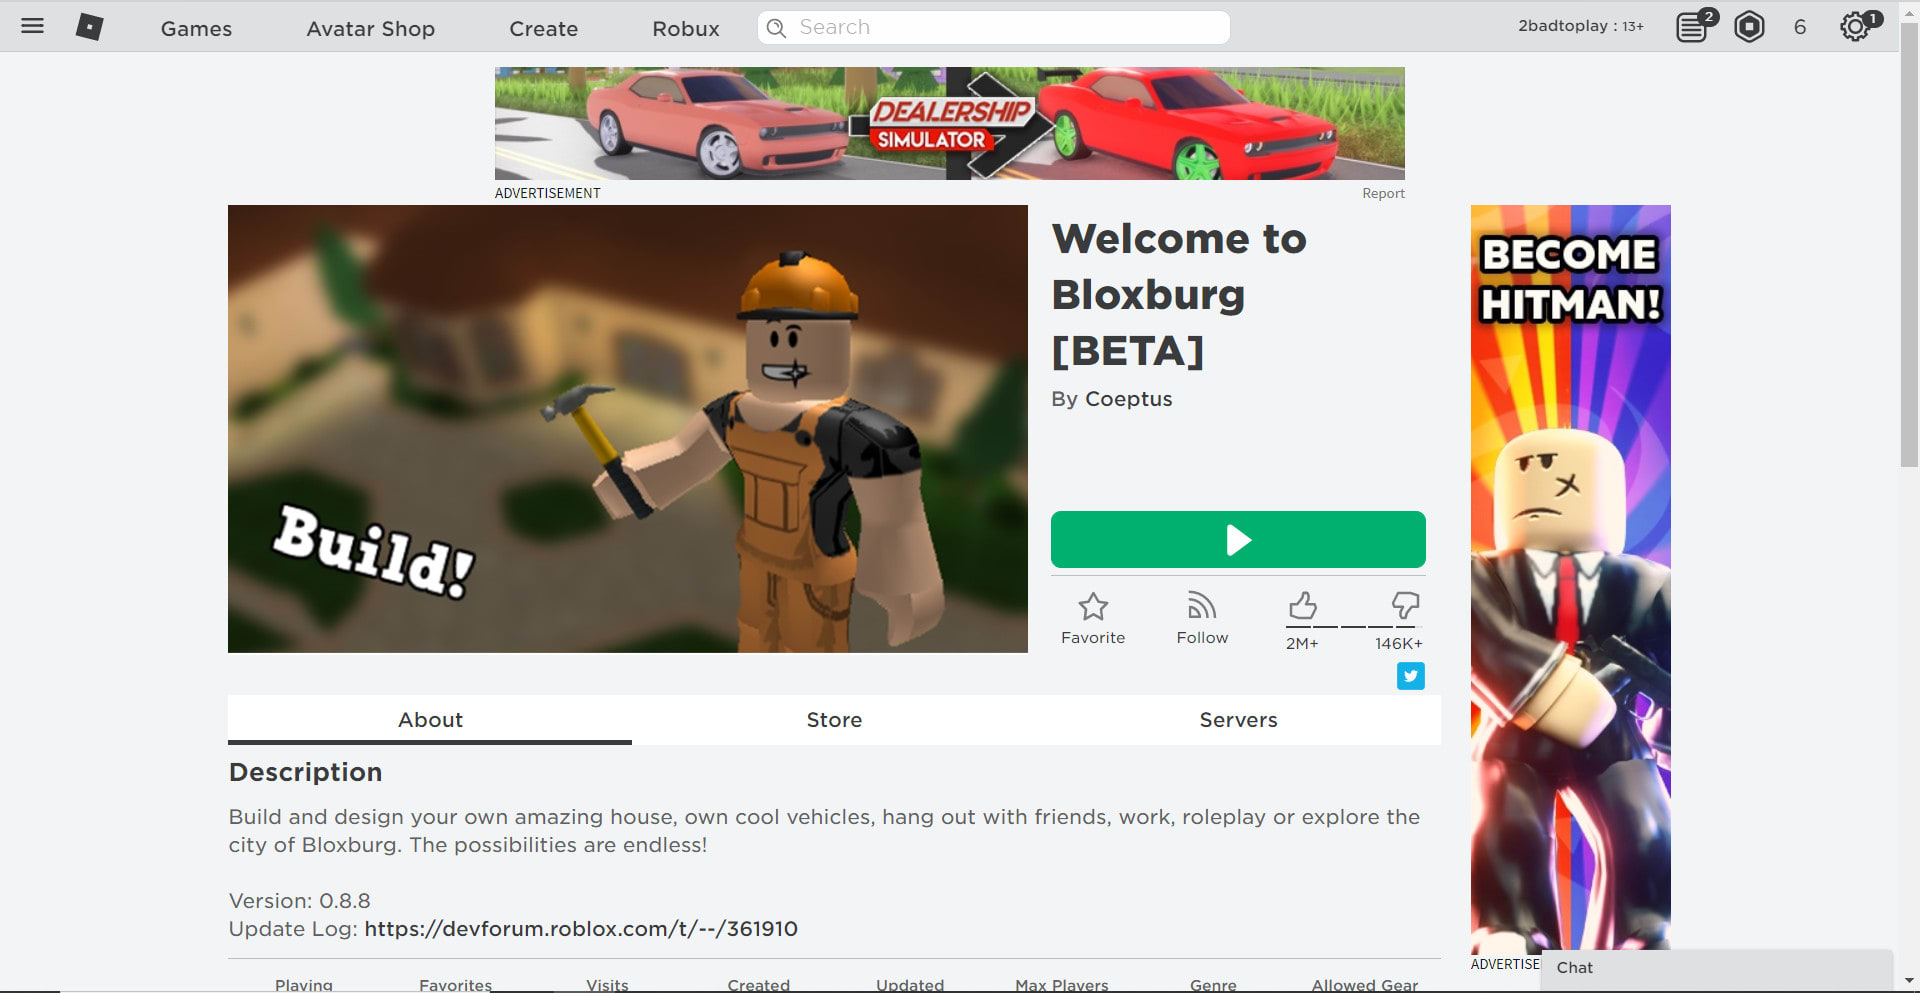 Work For You As A Pizza Delivery Person At Roblox Bloxburg By Tutwelis - roblox bloxburg vehicles